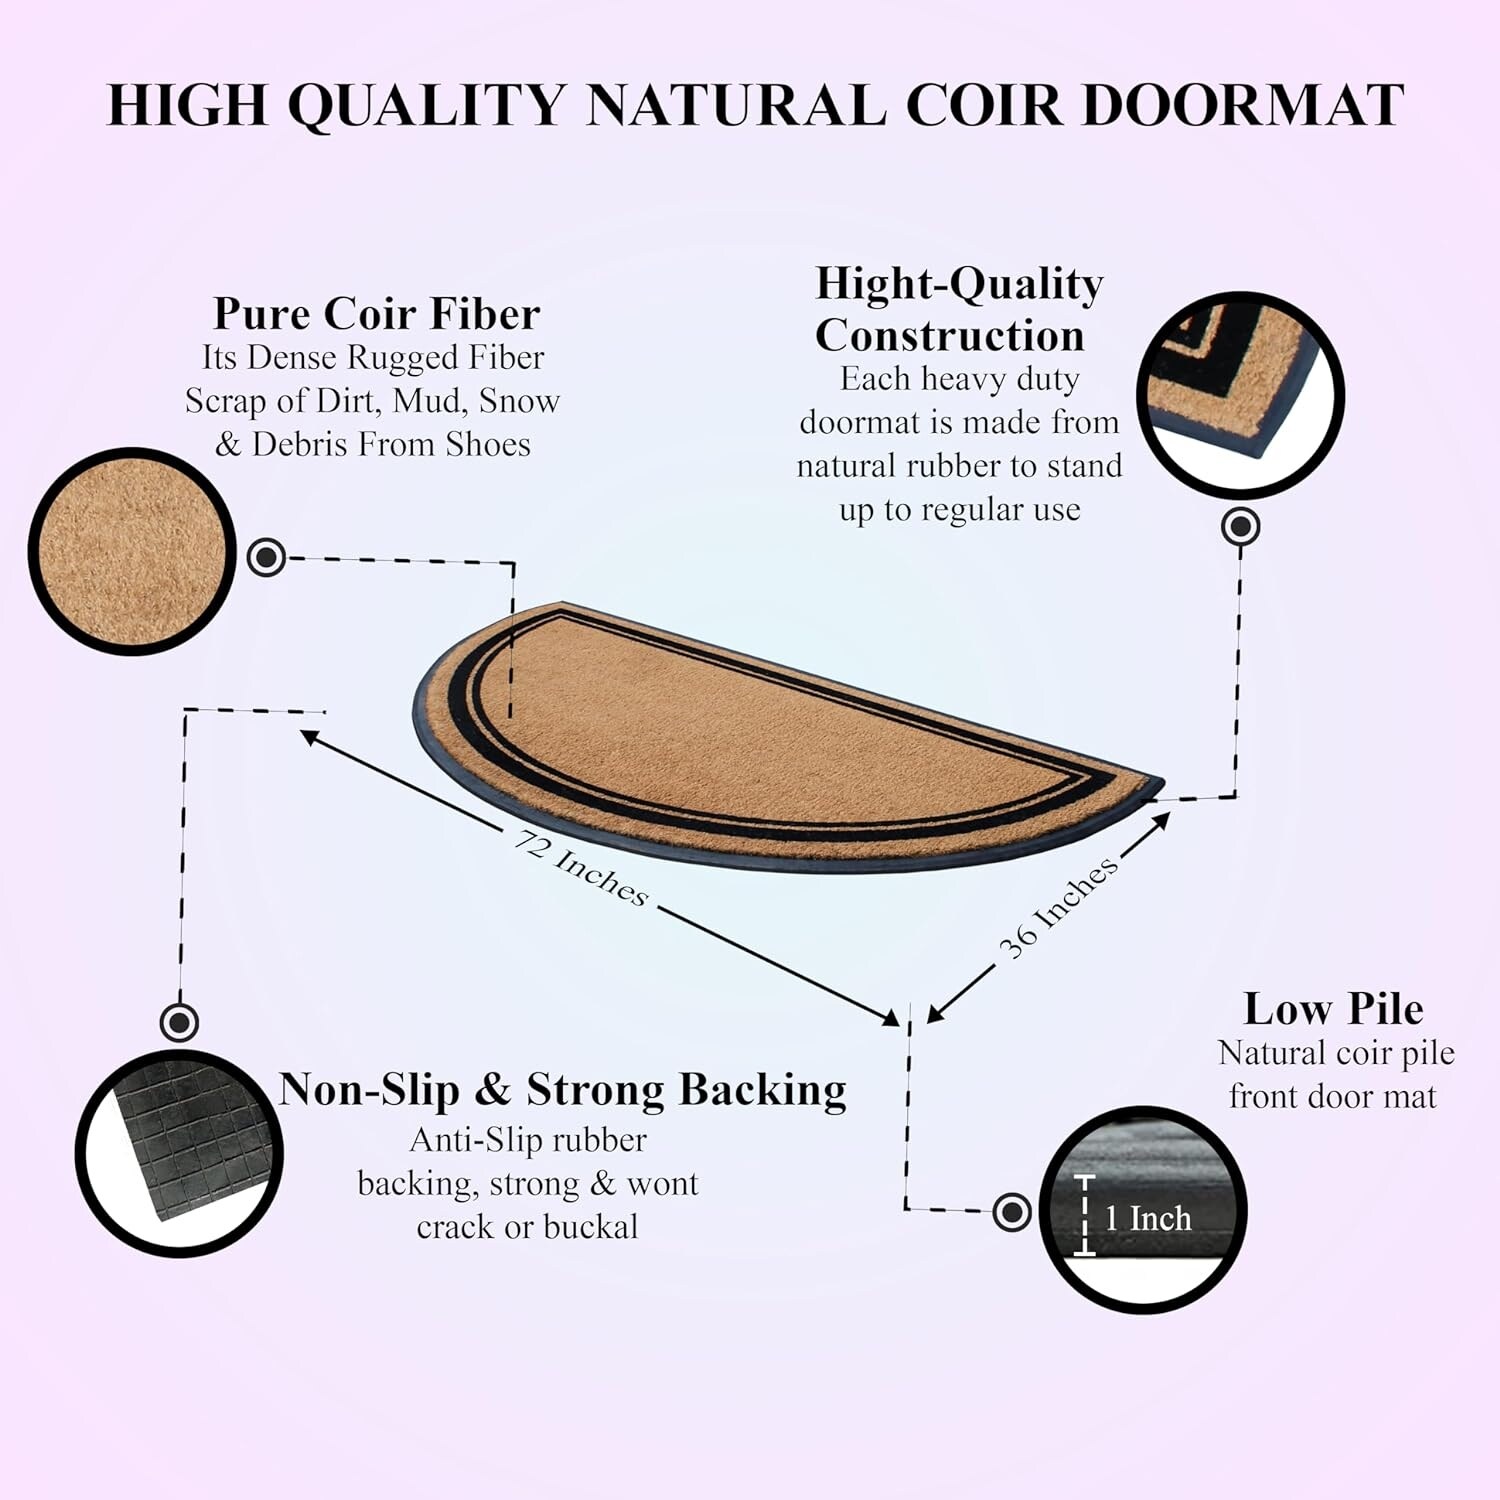 https://ak1.ostkcdn.com/images/products/is/images/direct/8b68a8af70005210ac19562c43d98ab863d6f3c6/A1HC-Natural-Coir-%26-Rubber-Hand-Flocked-Large-Door-Mat-36%22x72%22%2C-Heavy-Duty%2C-Long-Lasting-Thick-Durable-Doormats-for-Entrance.jpg